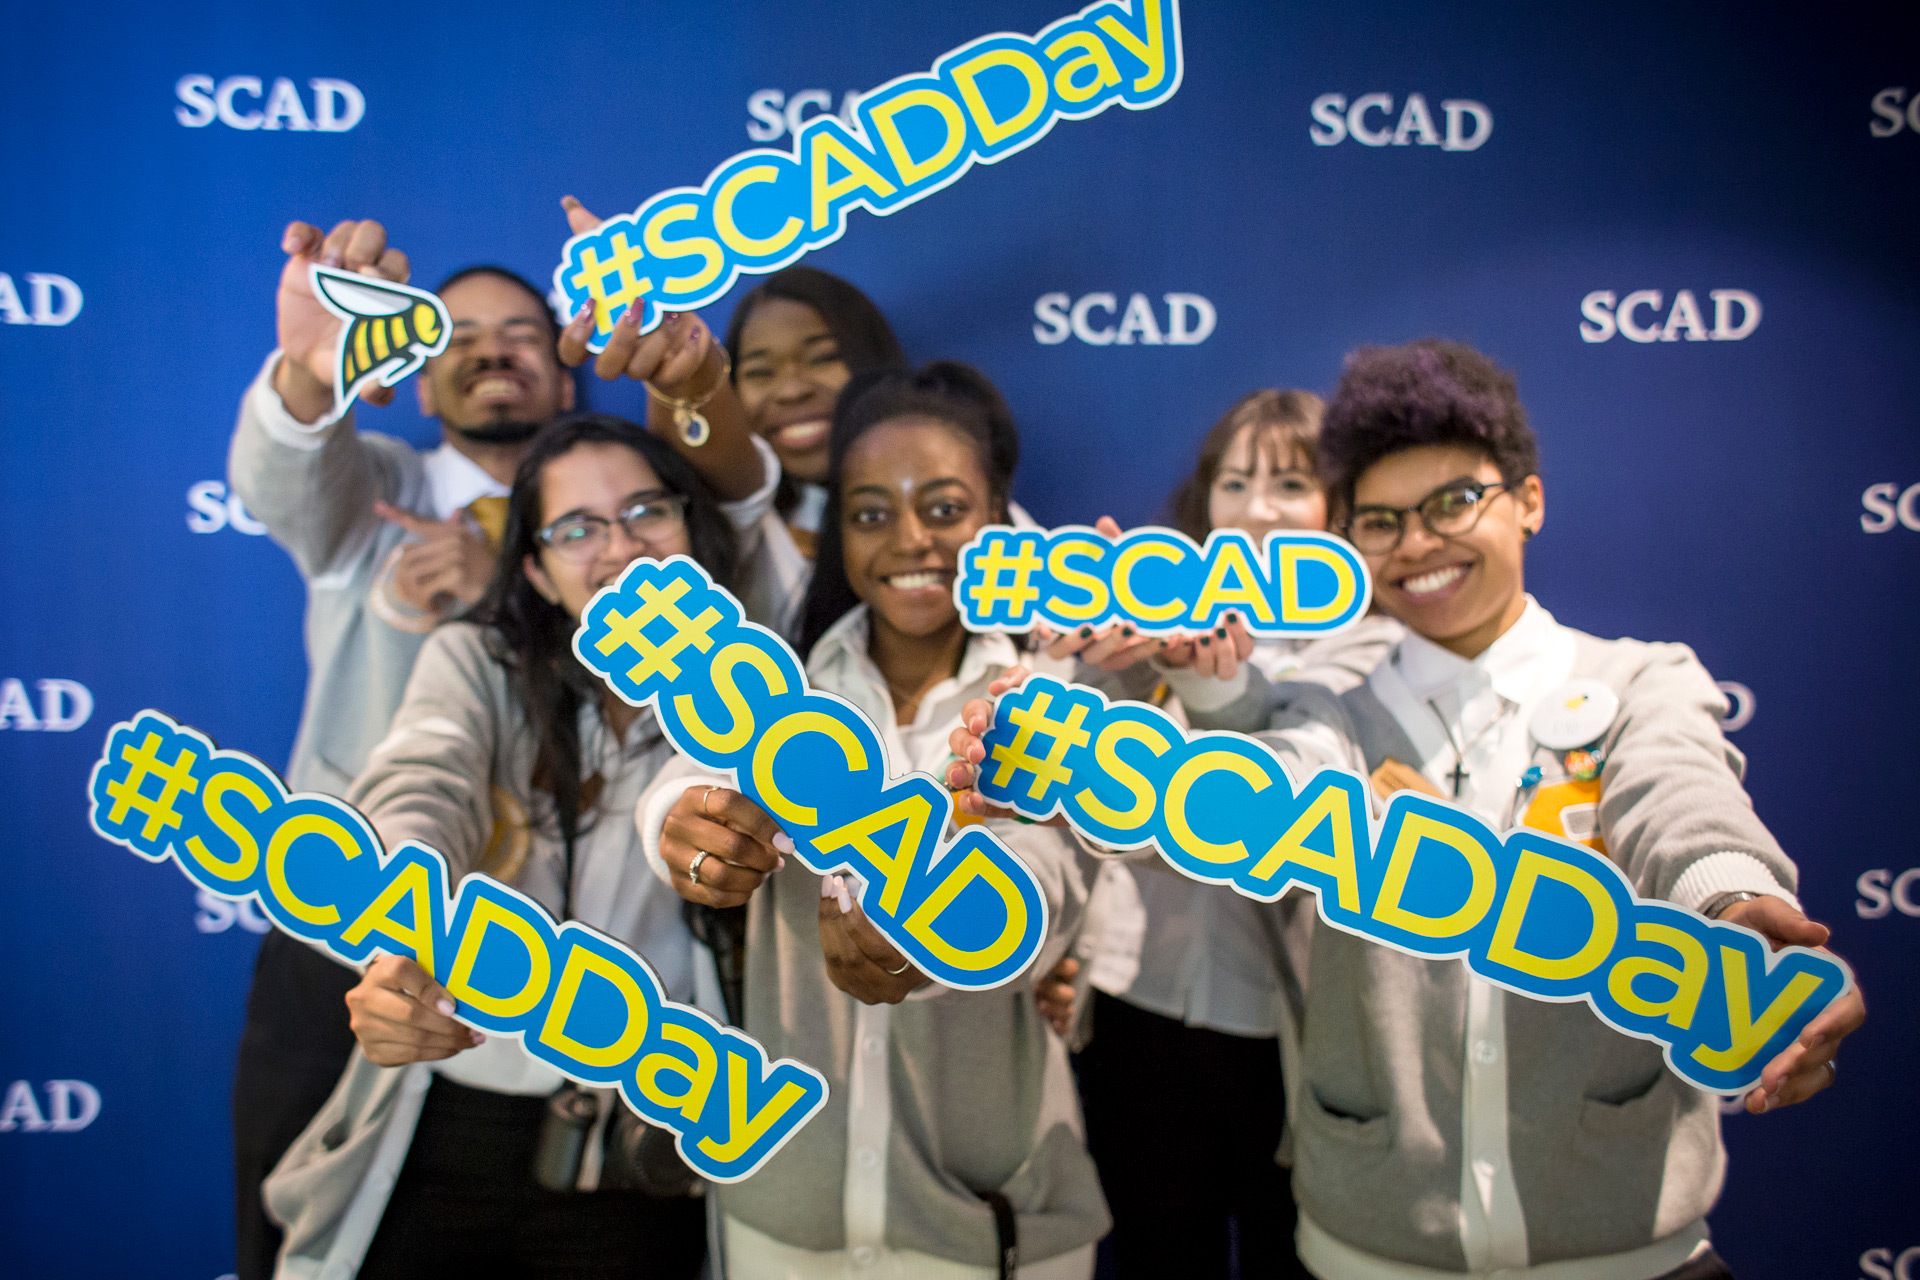 Get a glimpse of life at The University for Creative Careers at SCAD